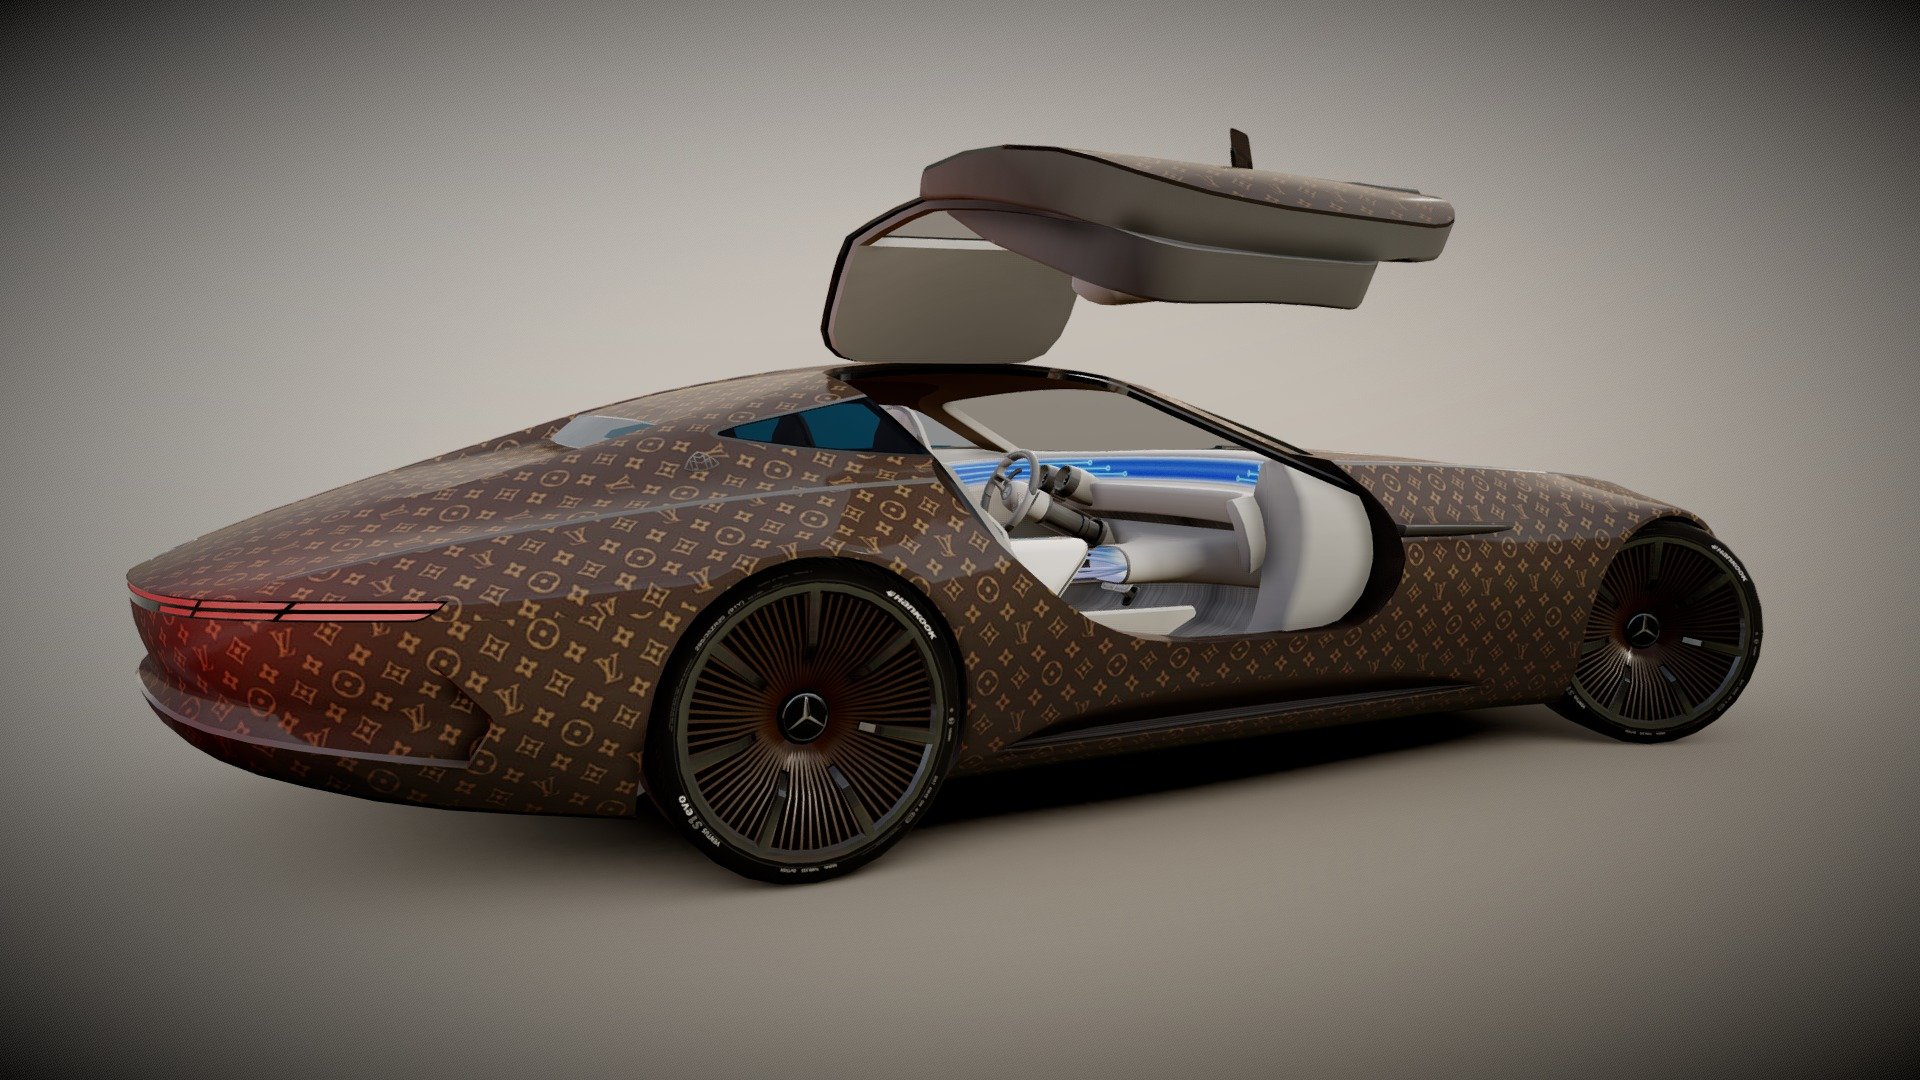 Low poly model. HQ interior. Optimized textures. Baked AO. Body - 1mat. 2048 texture. Wheels - 1mat. 512 texture - Mercedes Maybach Vision 6 - 3D model by Главмеш (@glavmesh) 3d model